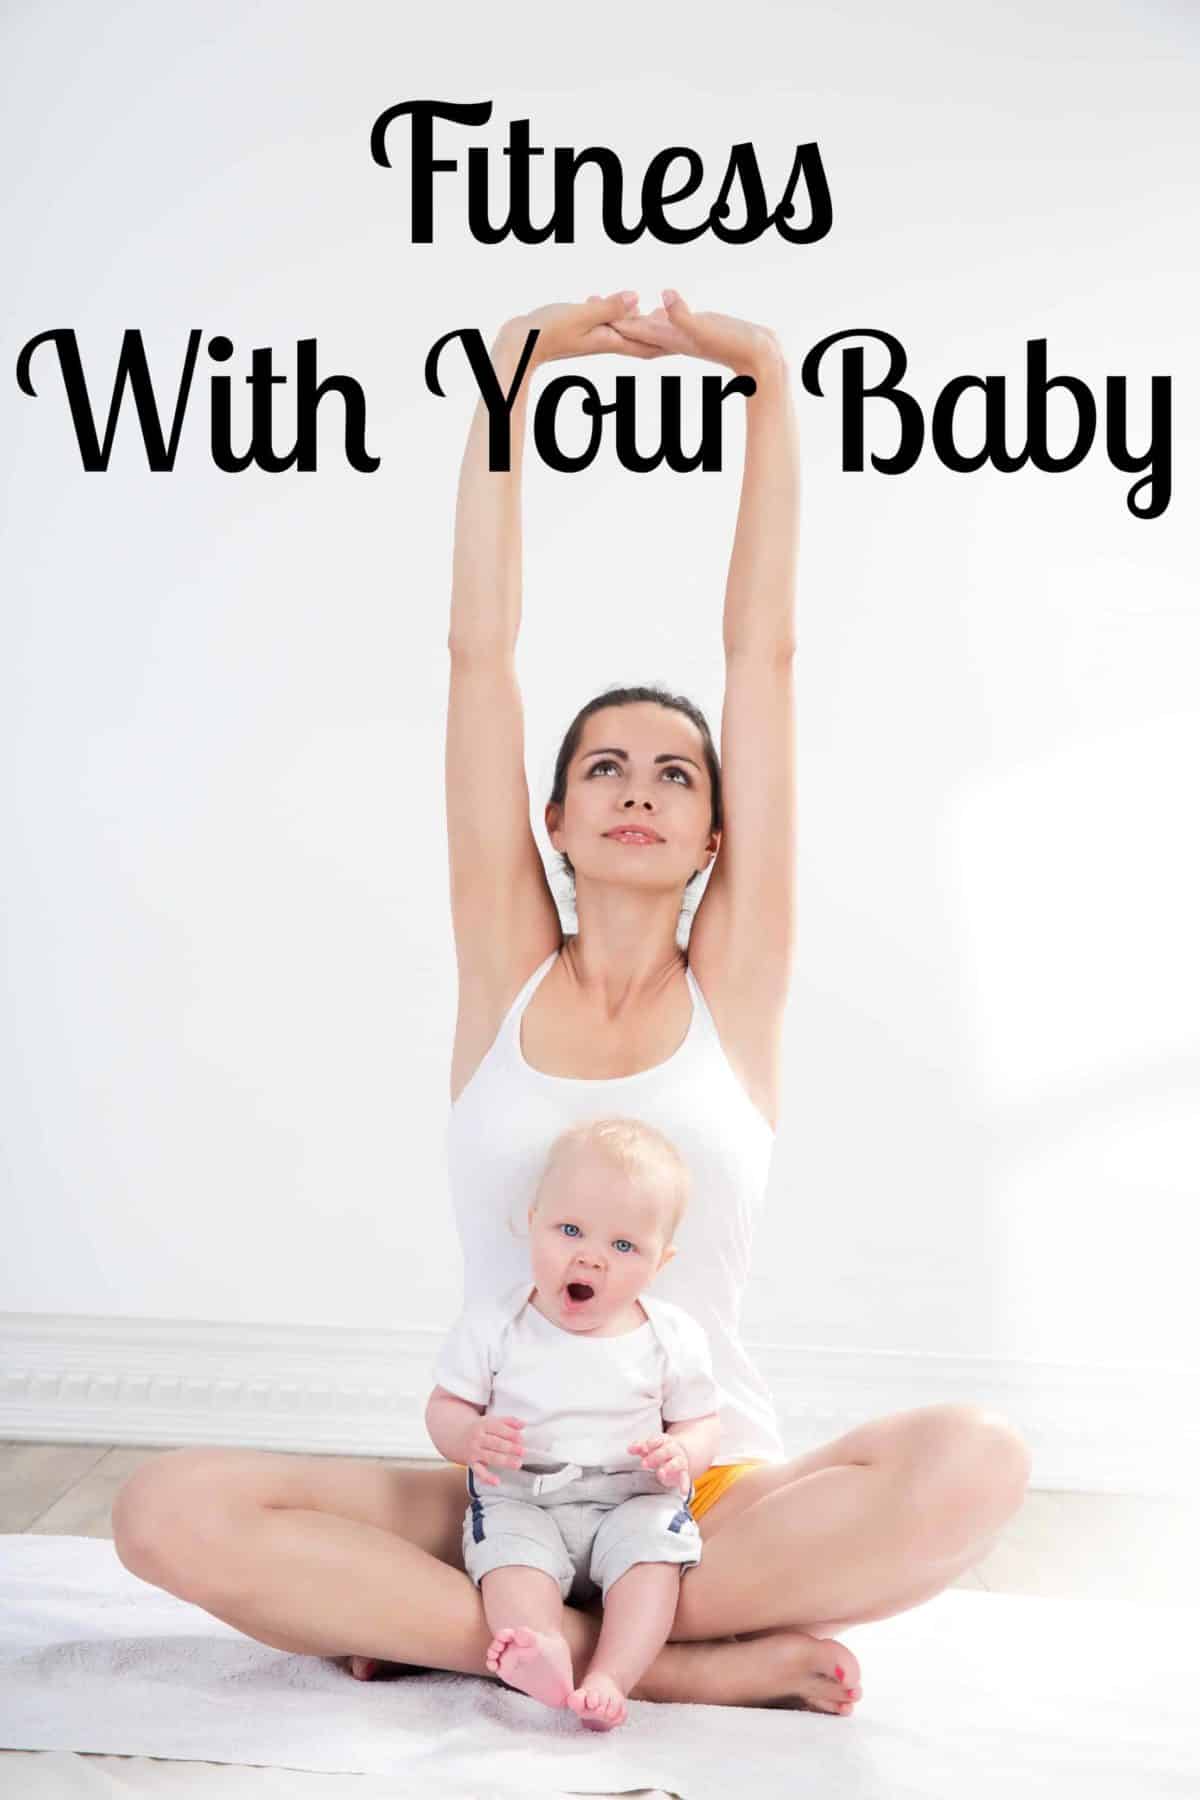 Wondering how to stay in shape with an infant? Check out these fun tips for fitness with a baby! It's easier than you might think to workout with an infant!